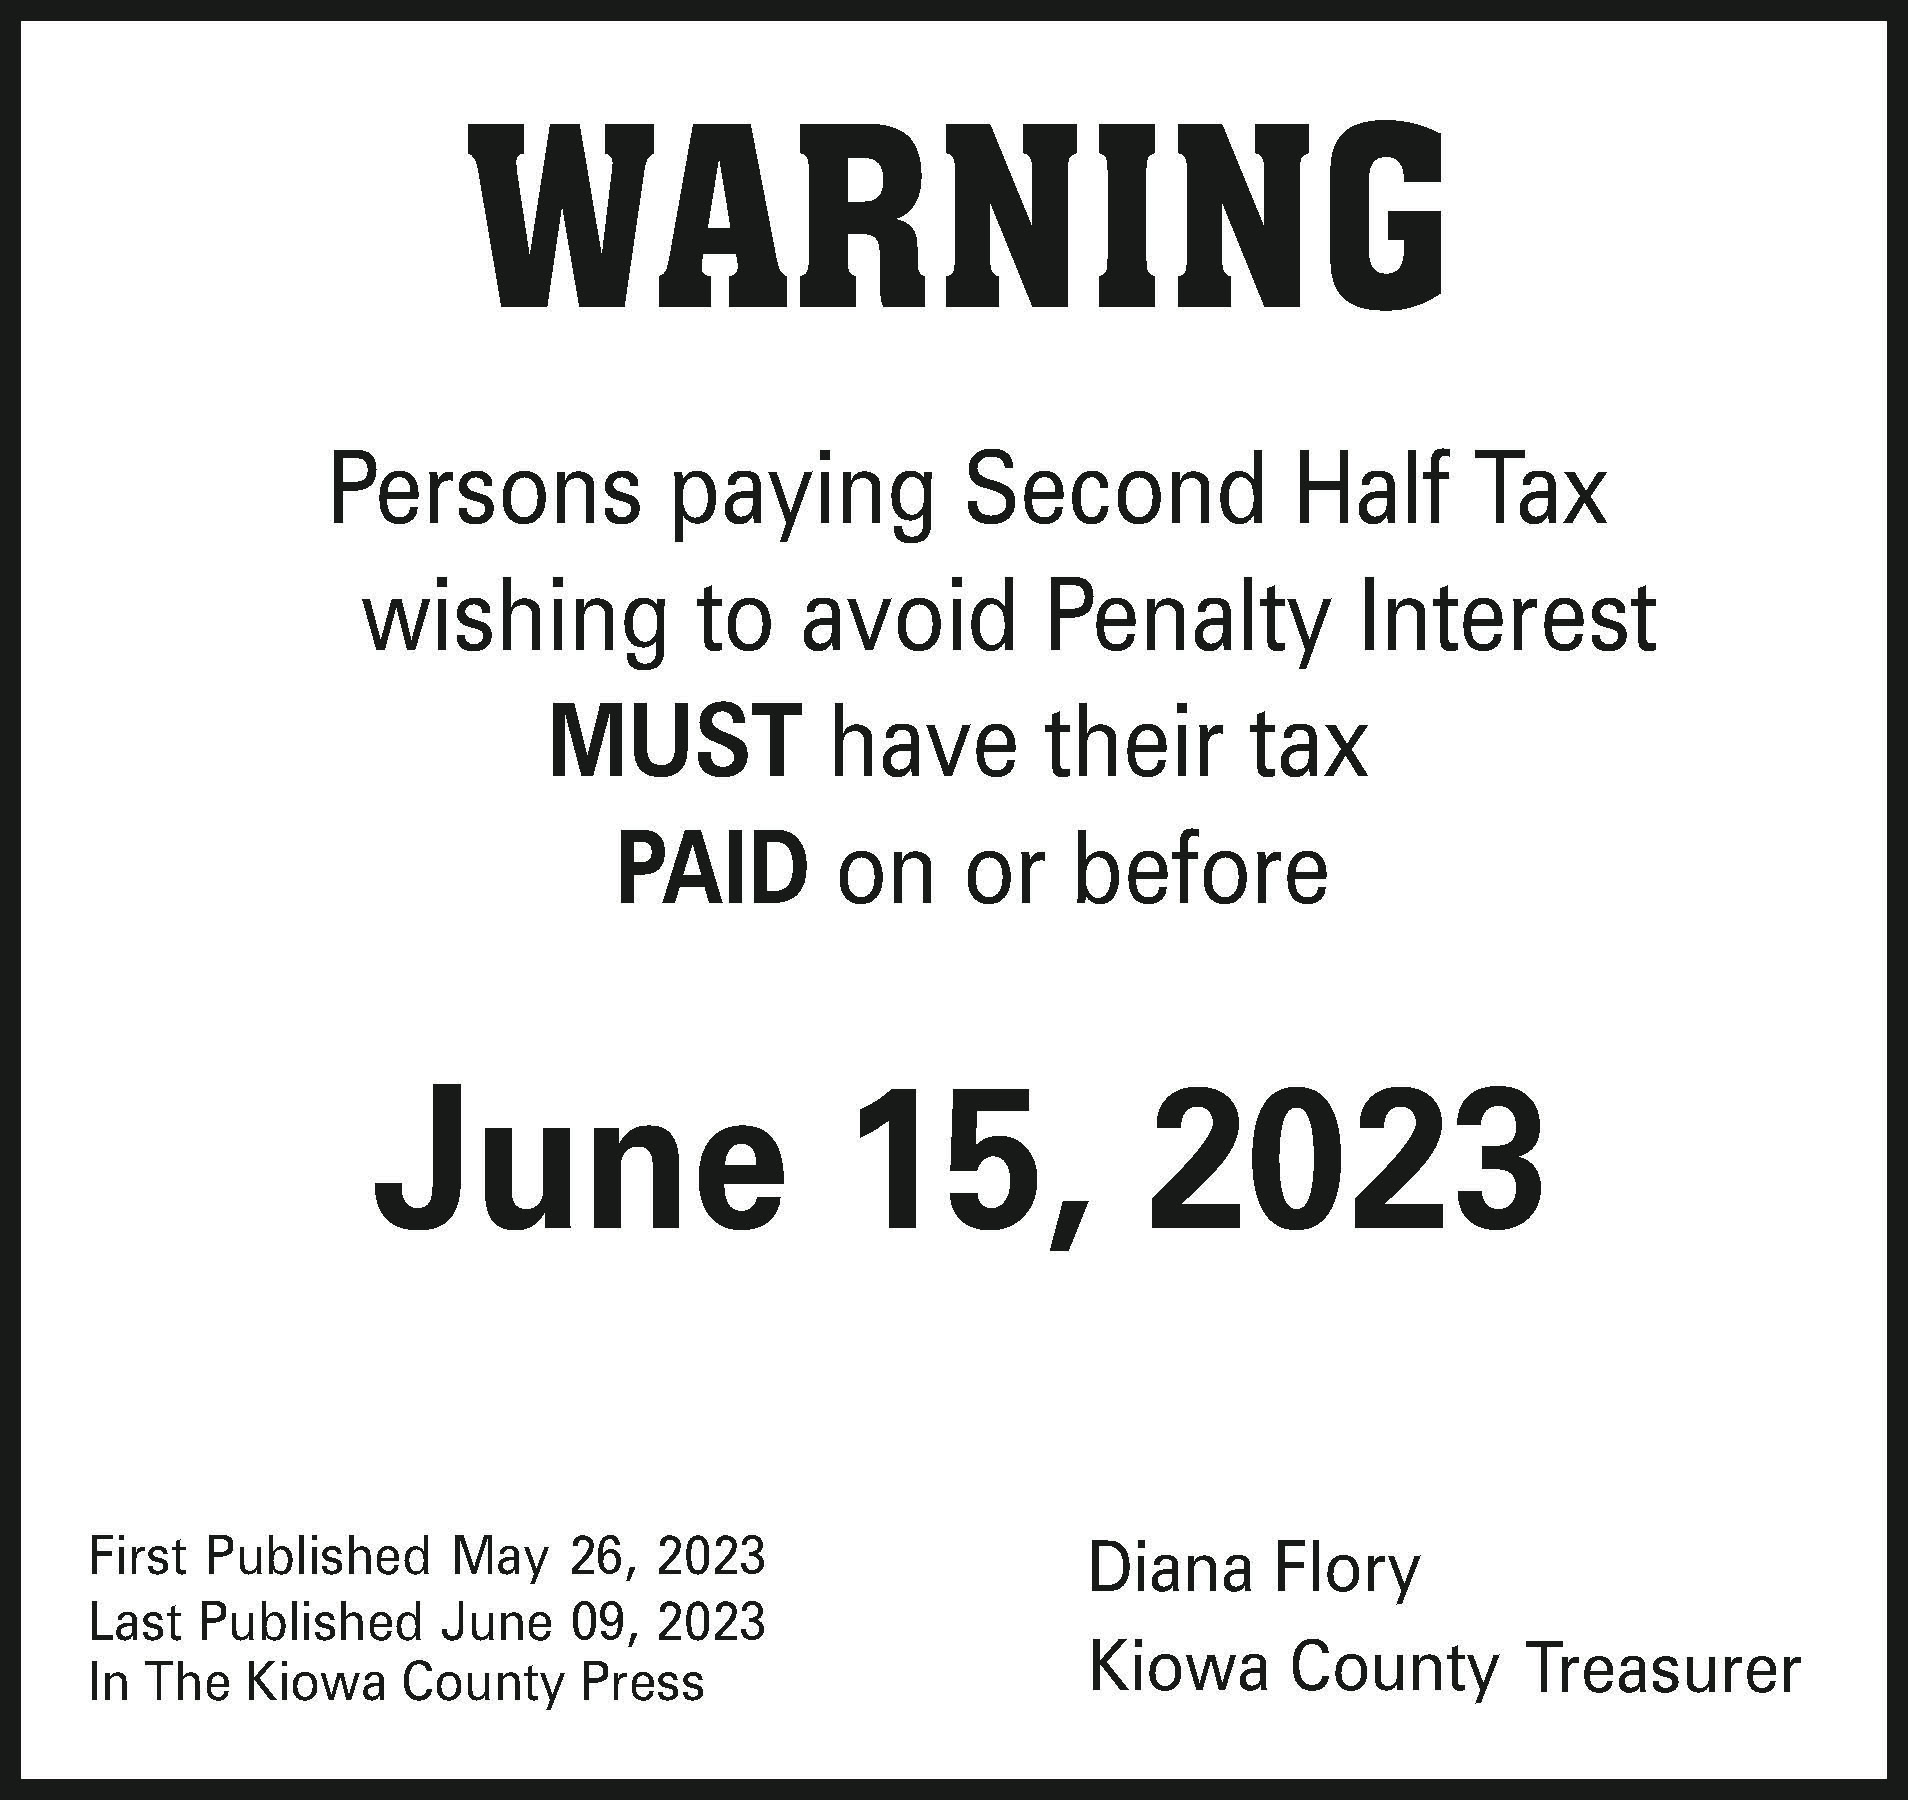 AD 2023-05 Warning - Second Half Taxes Due